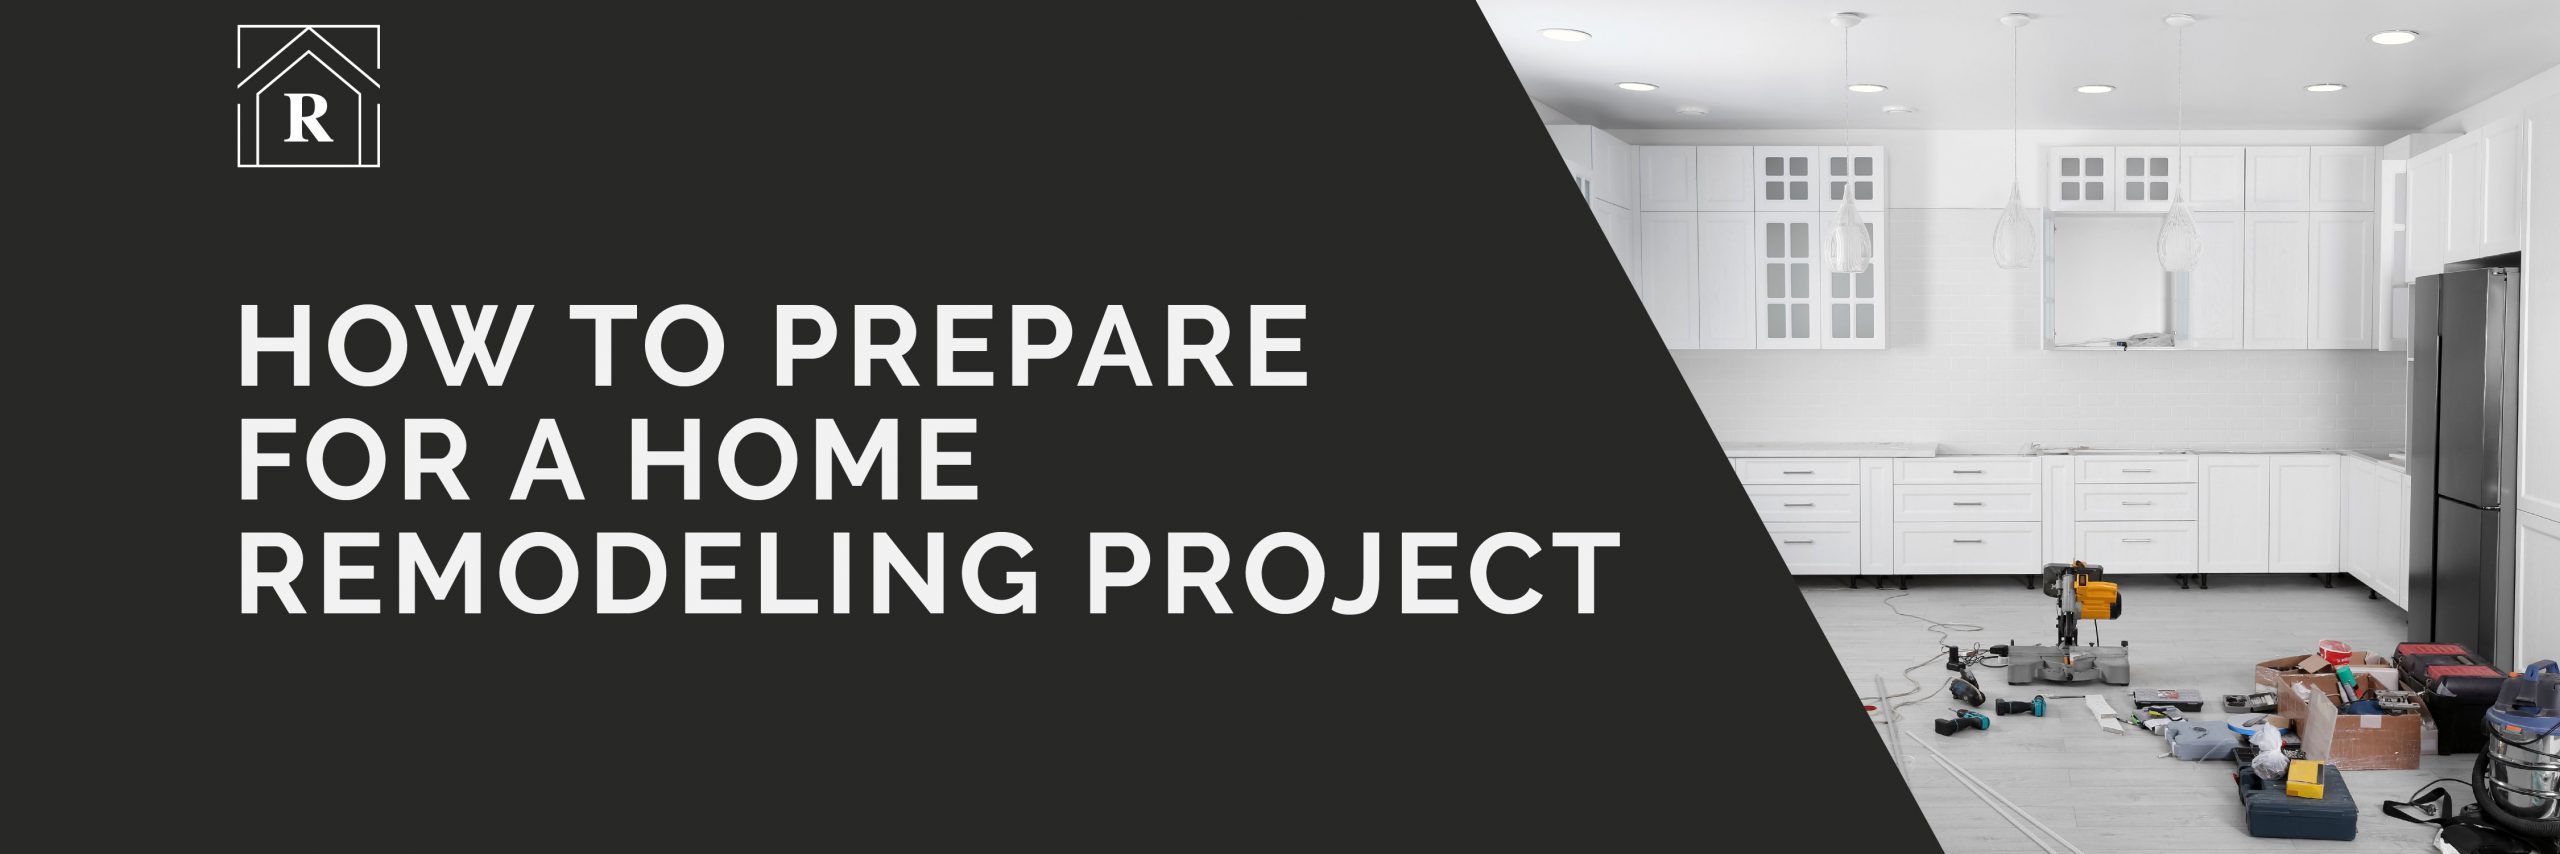 How to Prepare for a Home Remodeling Project